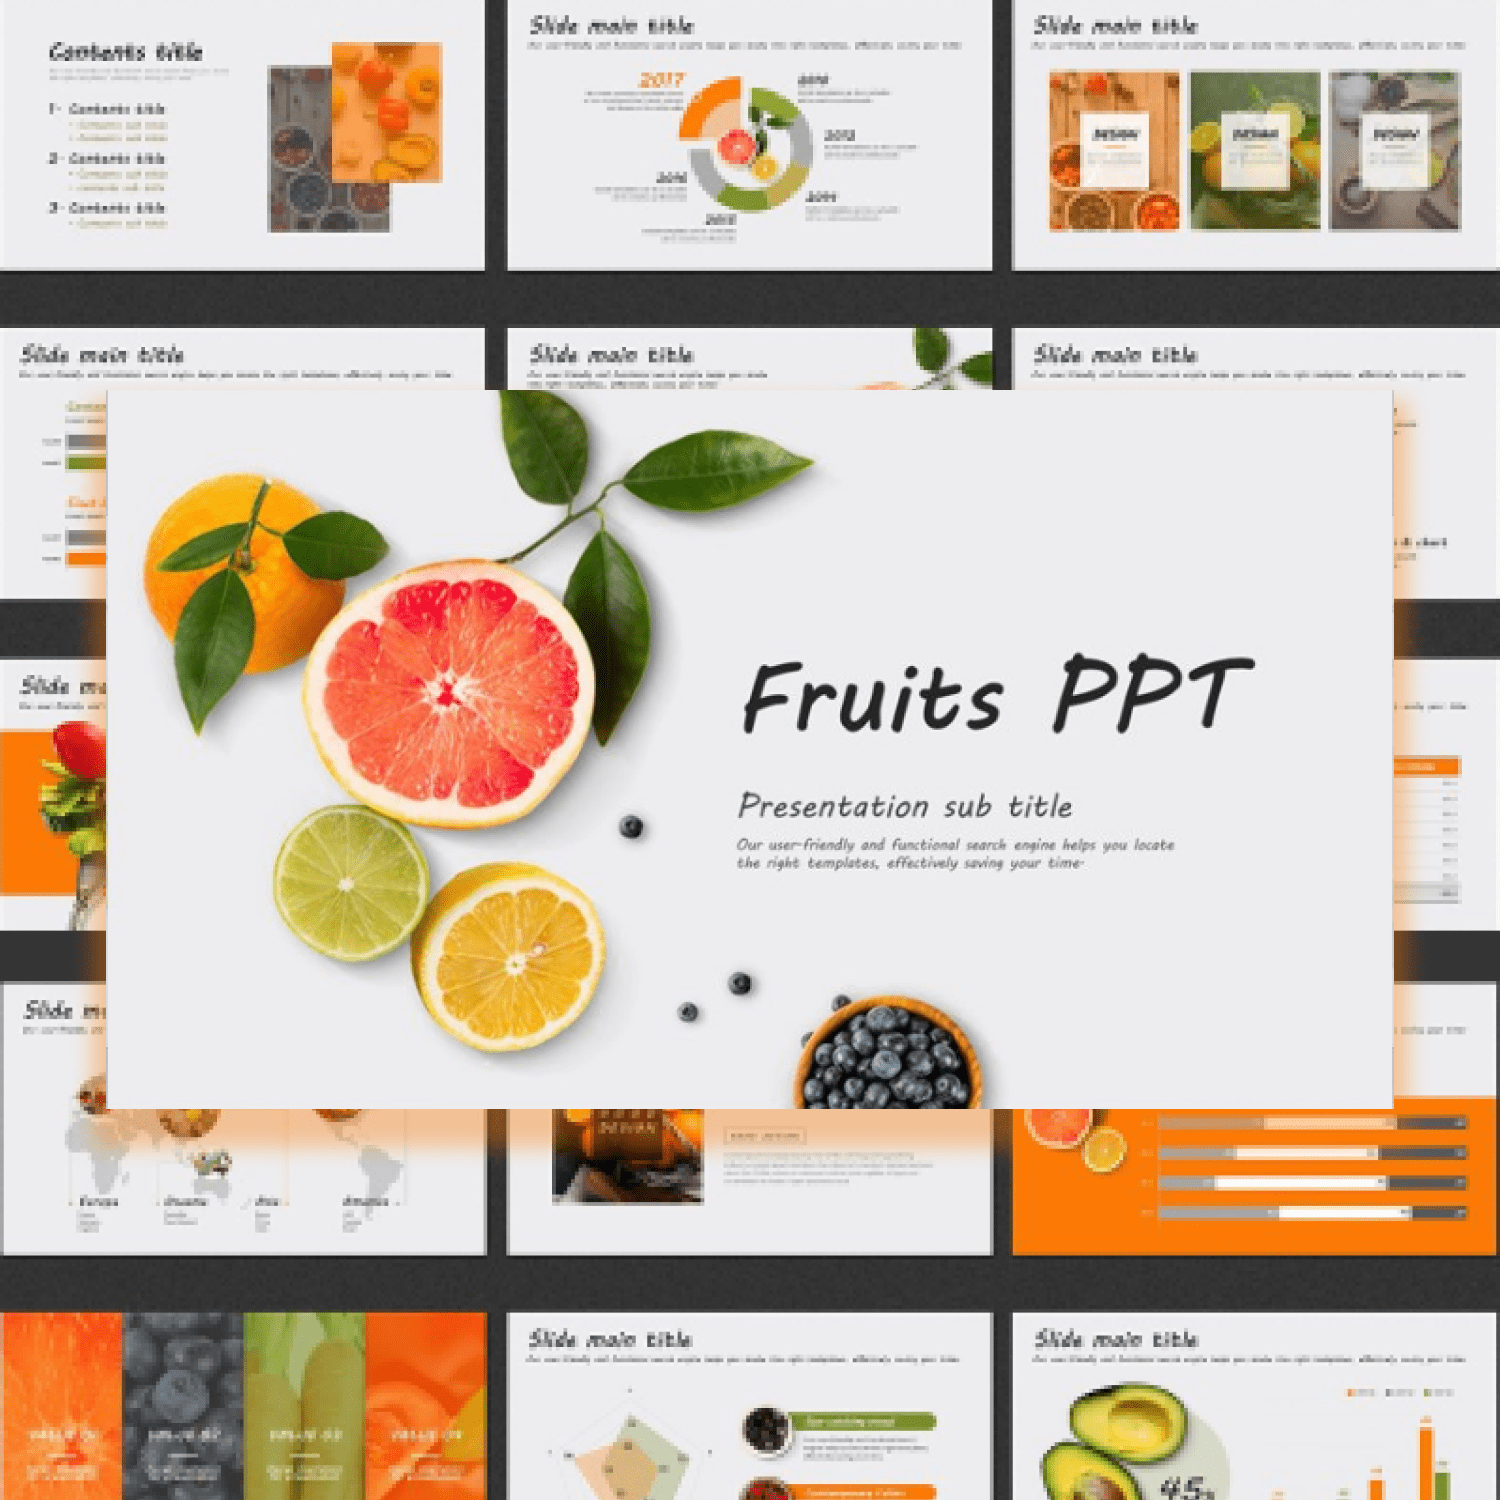 Fruits PPT Template main cover.